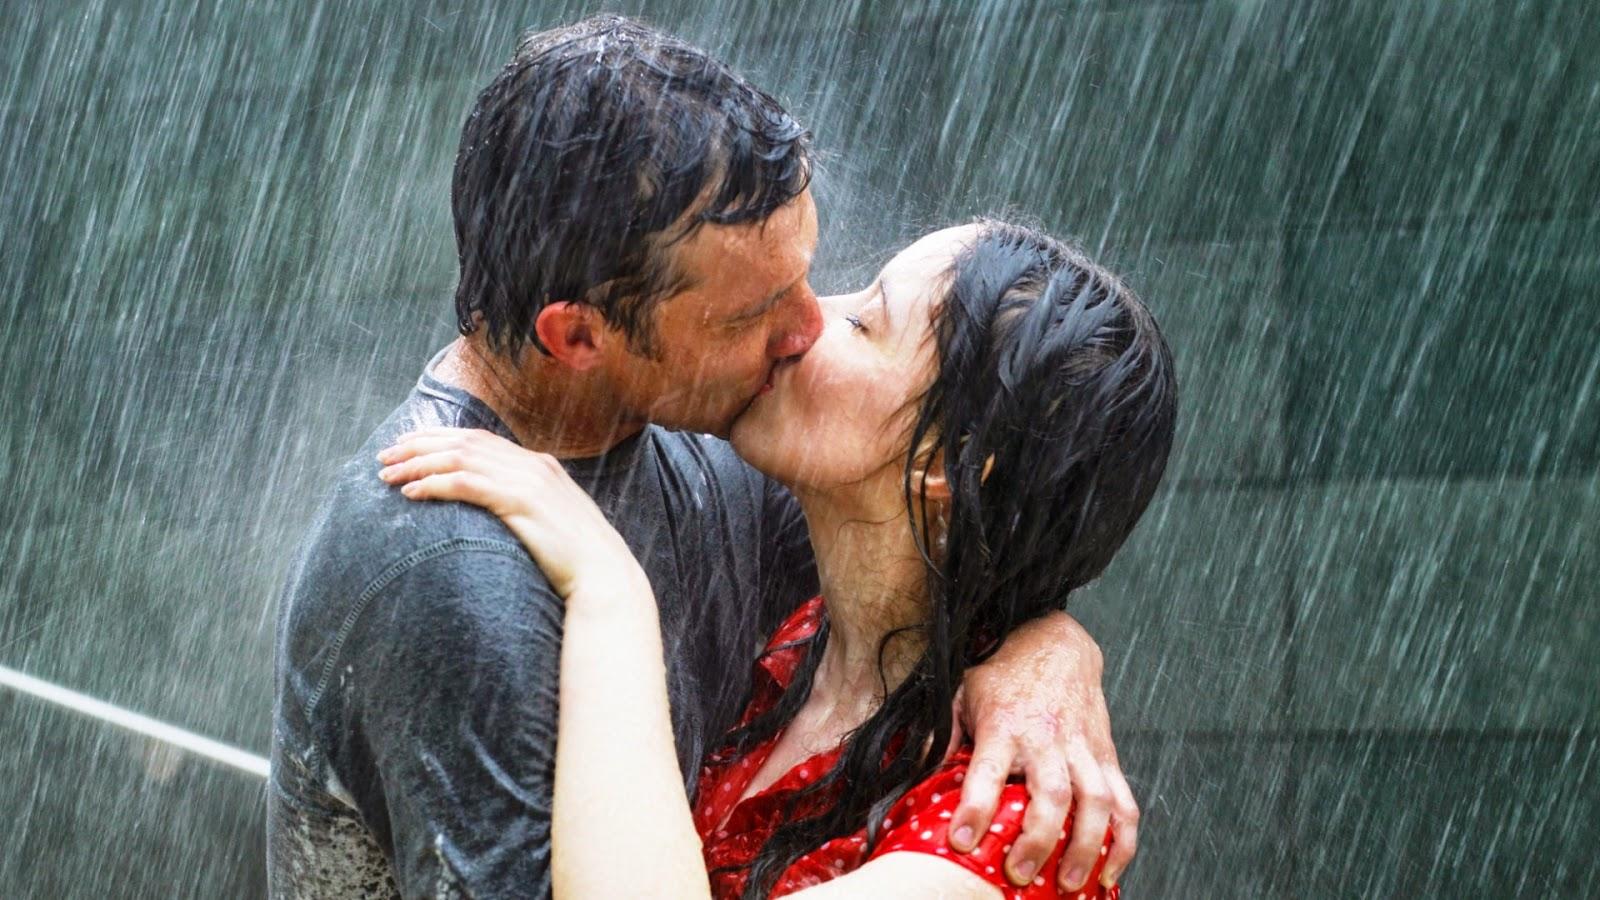 Passion in the Rain - Married sex stories - erotica picture